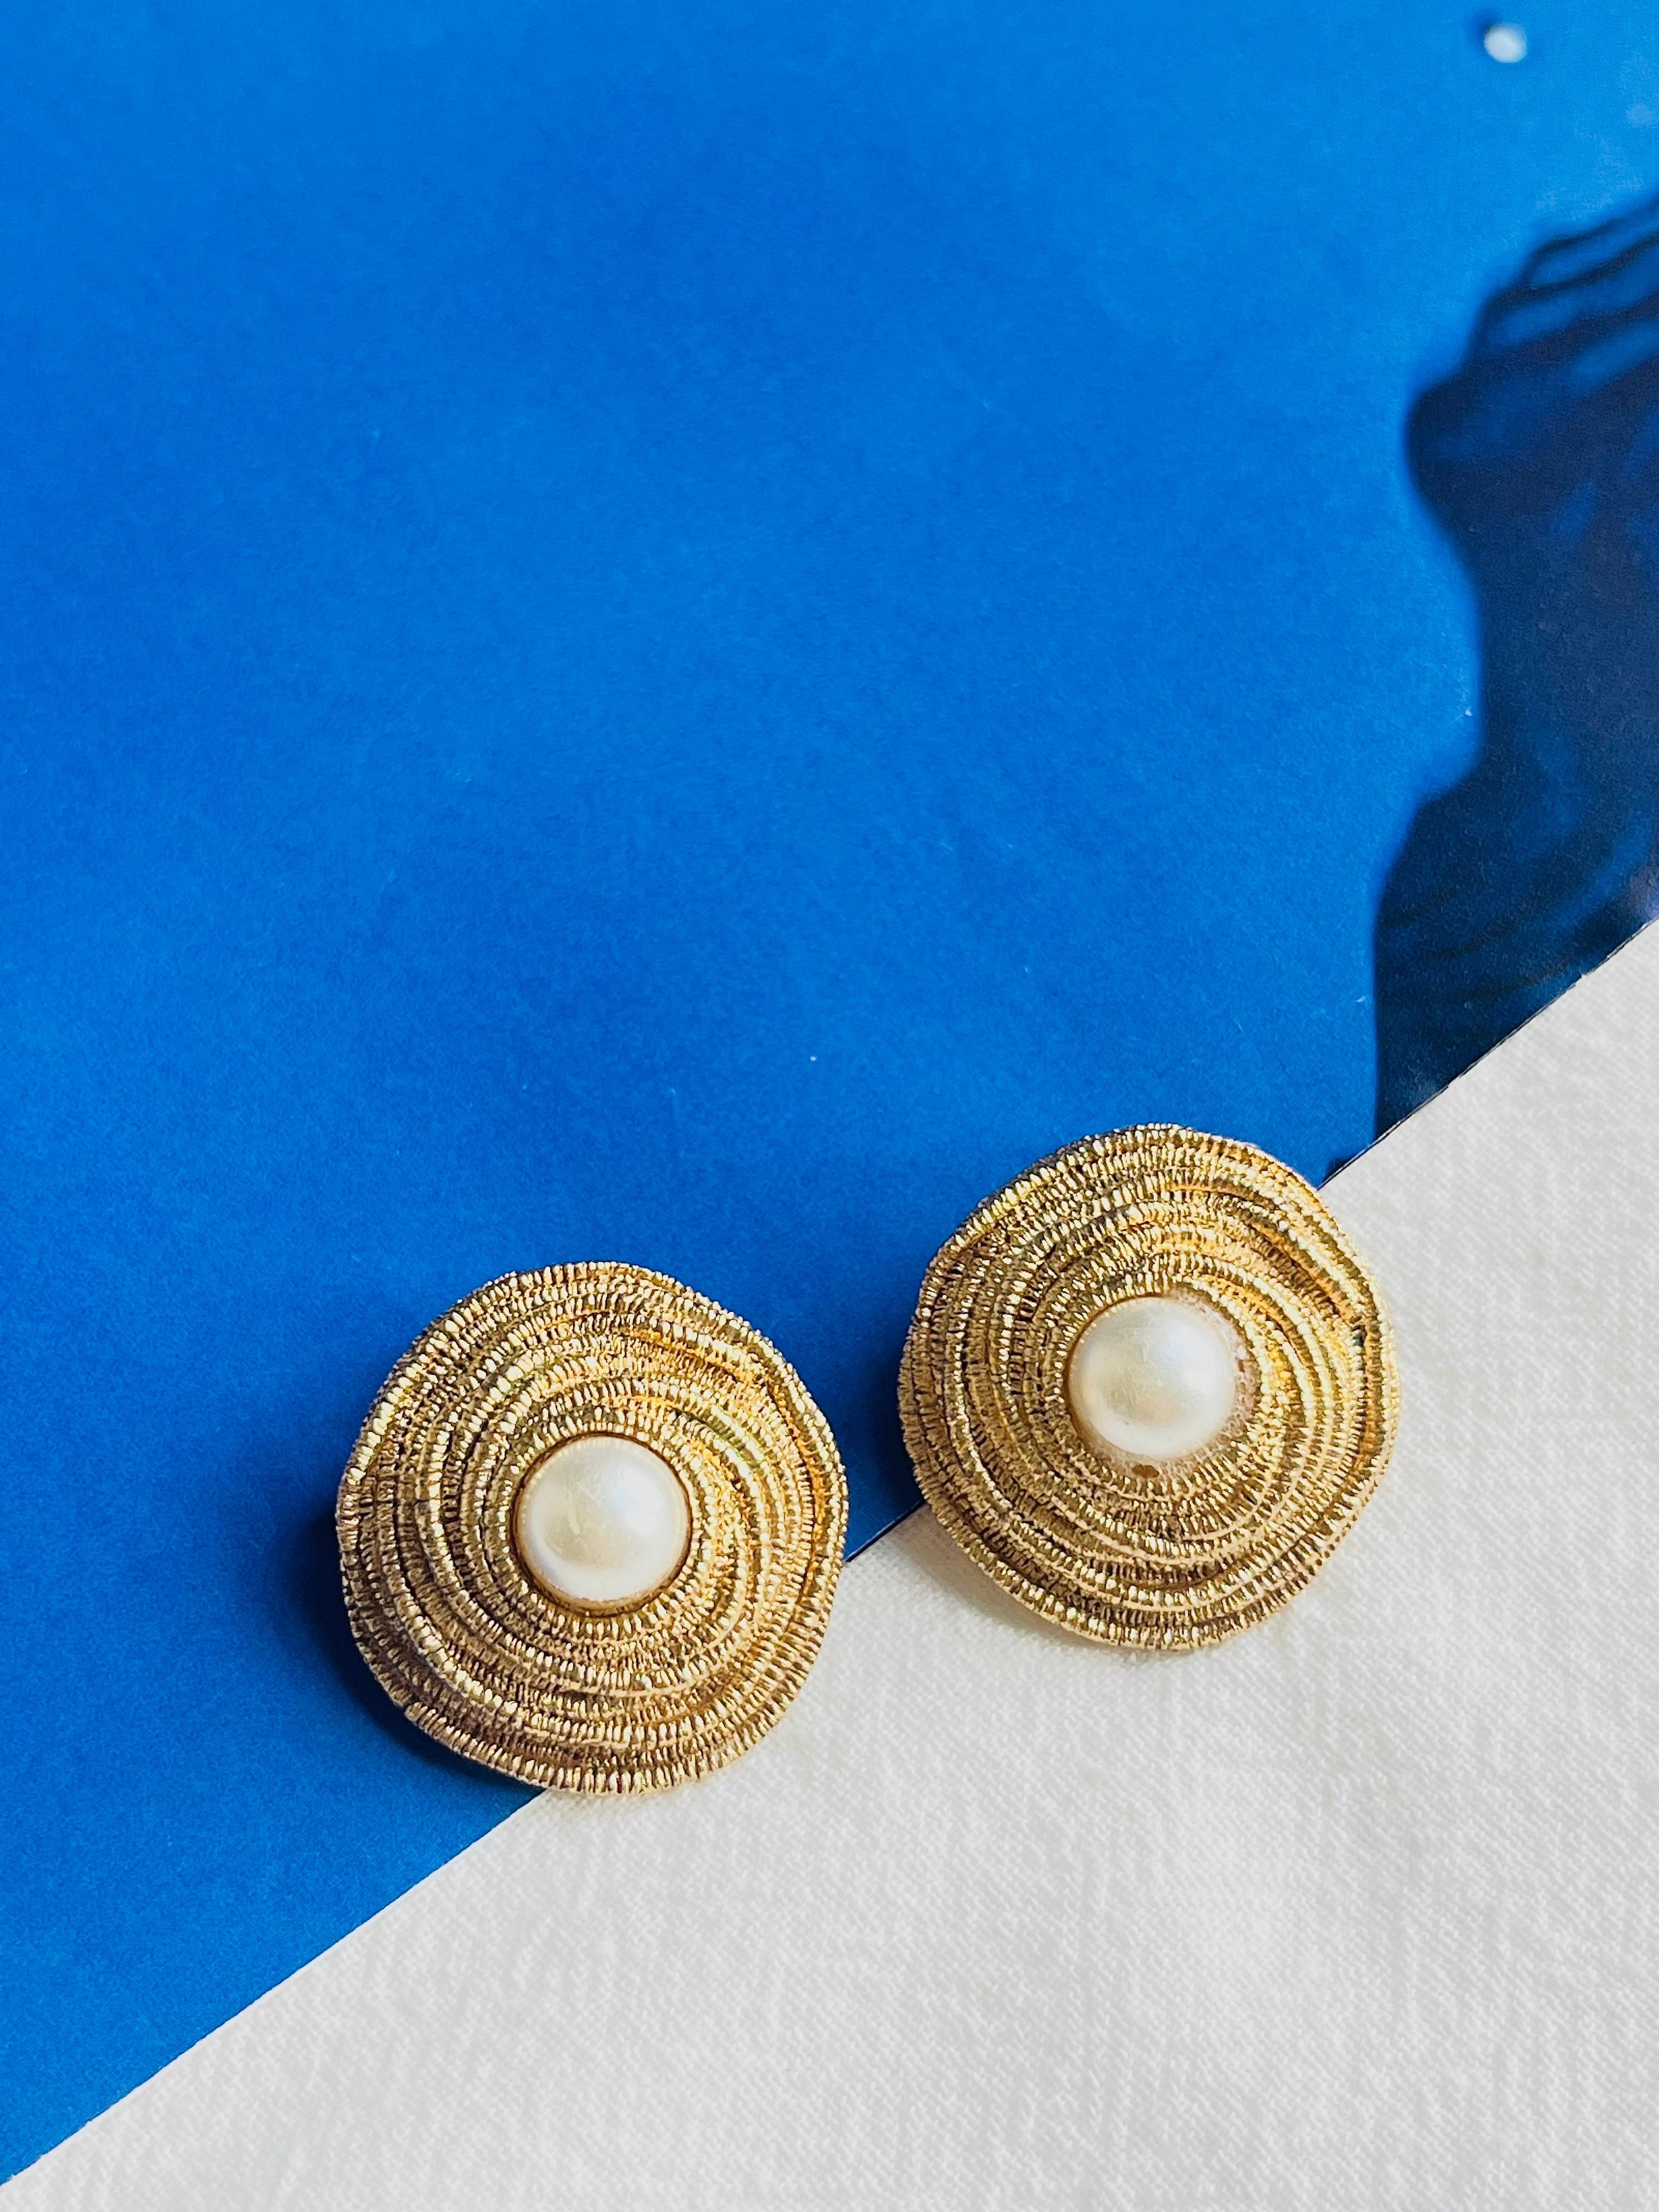 Christian Dior Vintage 1980s Irregular Spiral Round Circle Pearl Clip Earrings For Sale 1